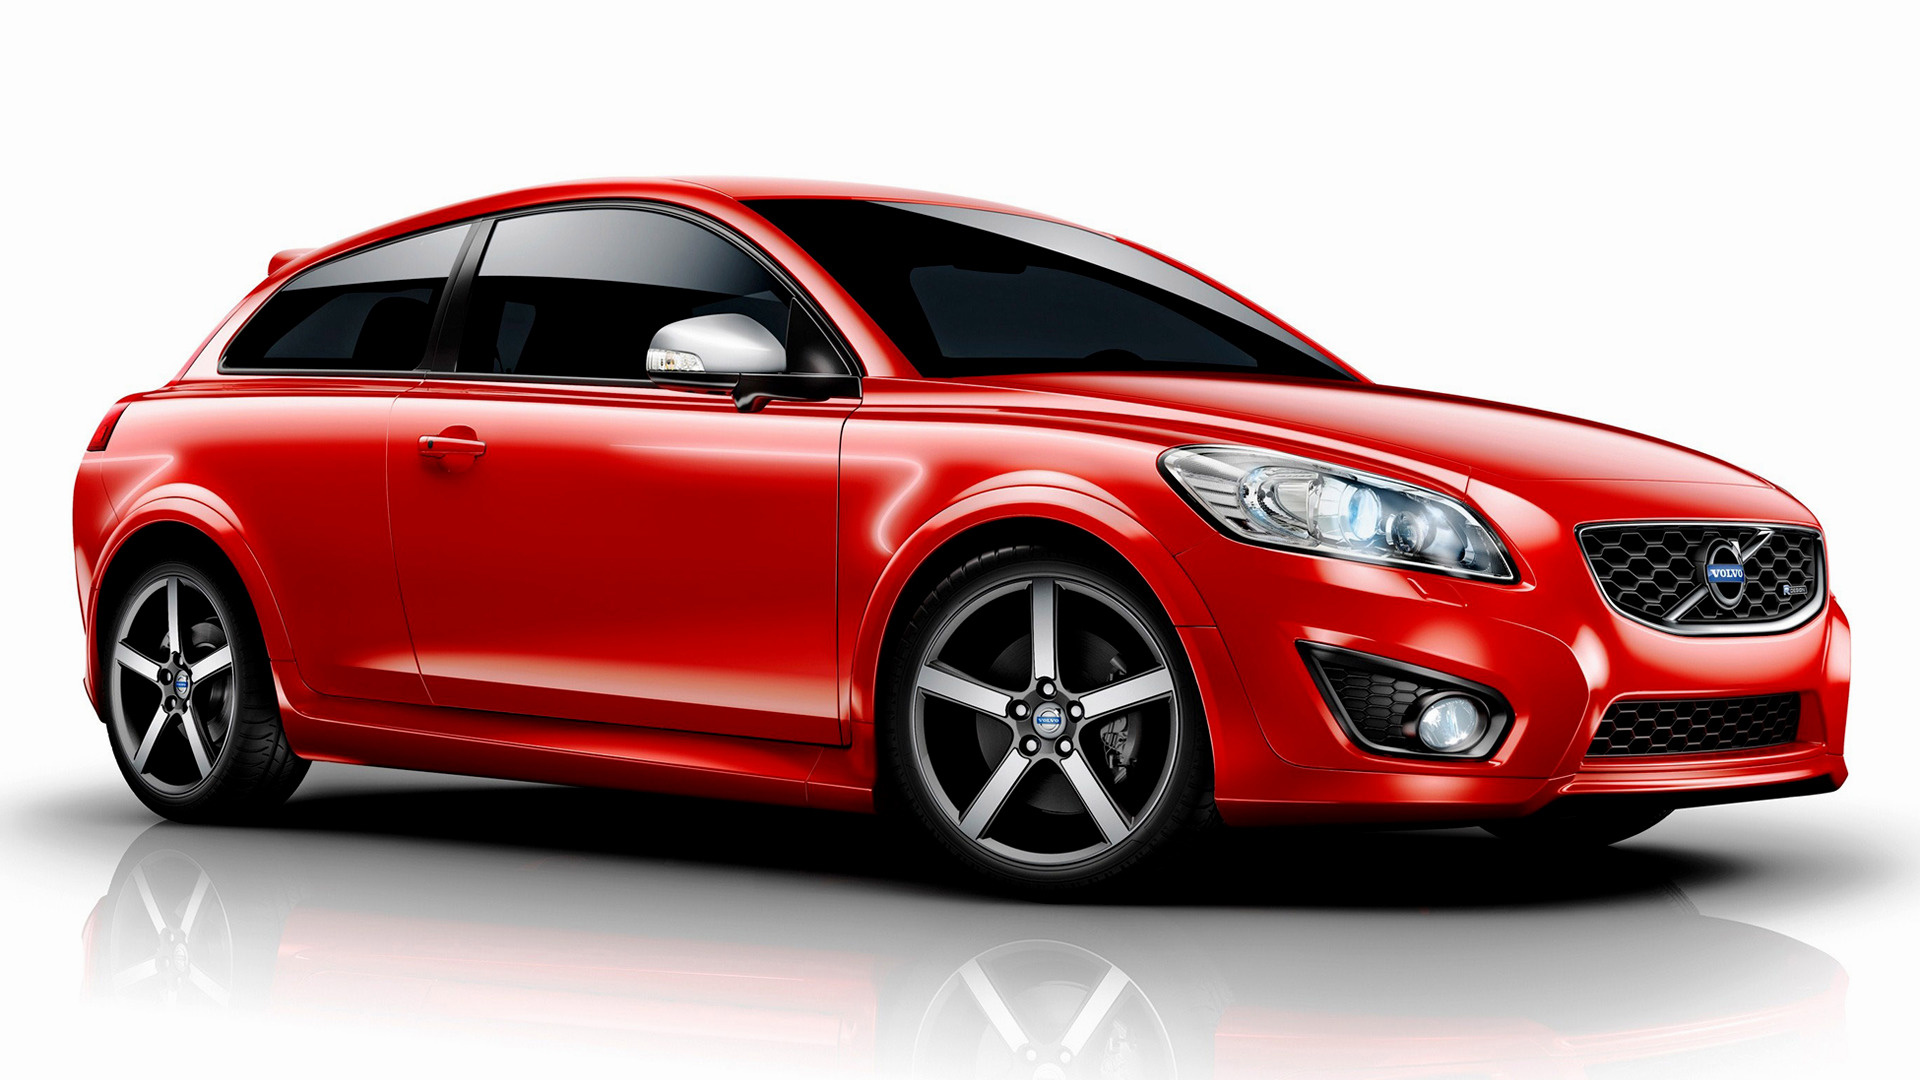 Volvo C30 HD Wallpaper and Background